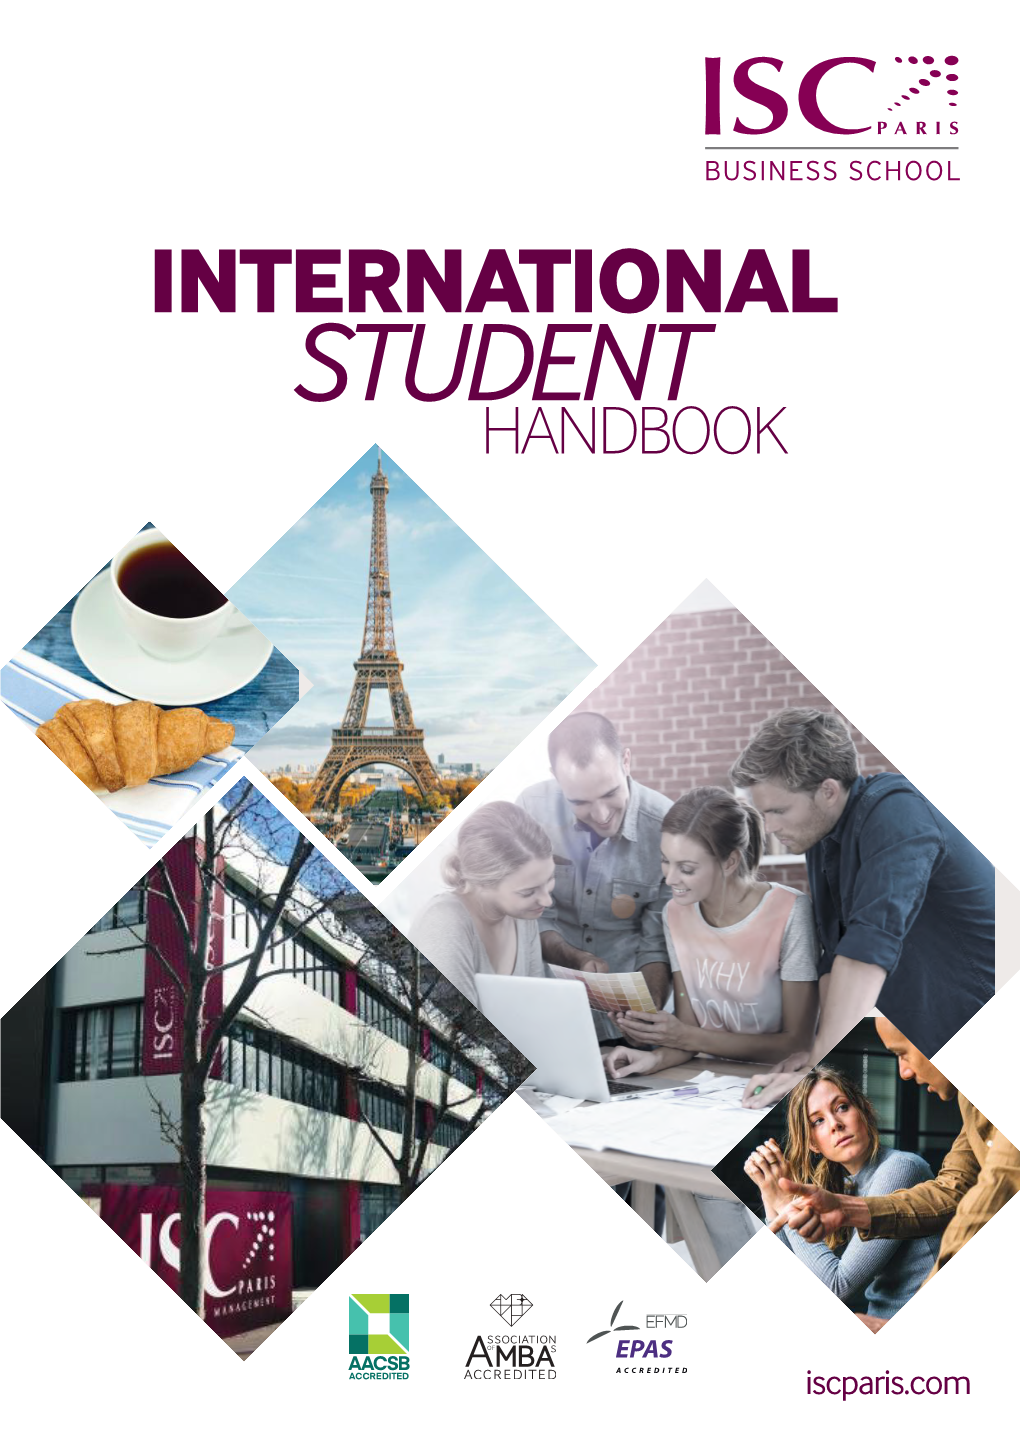 Download the English Version of the ISC Paris International Student